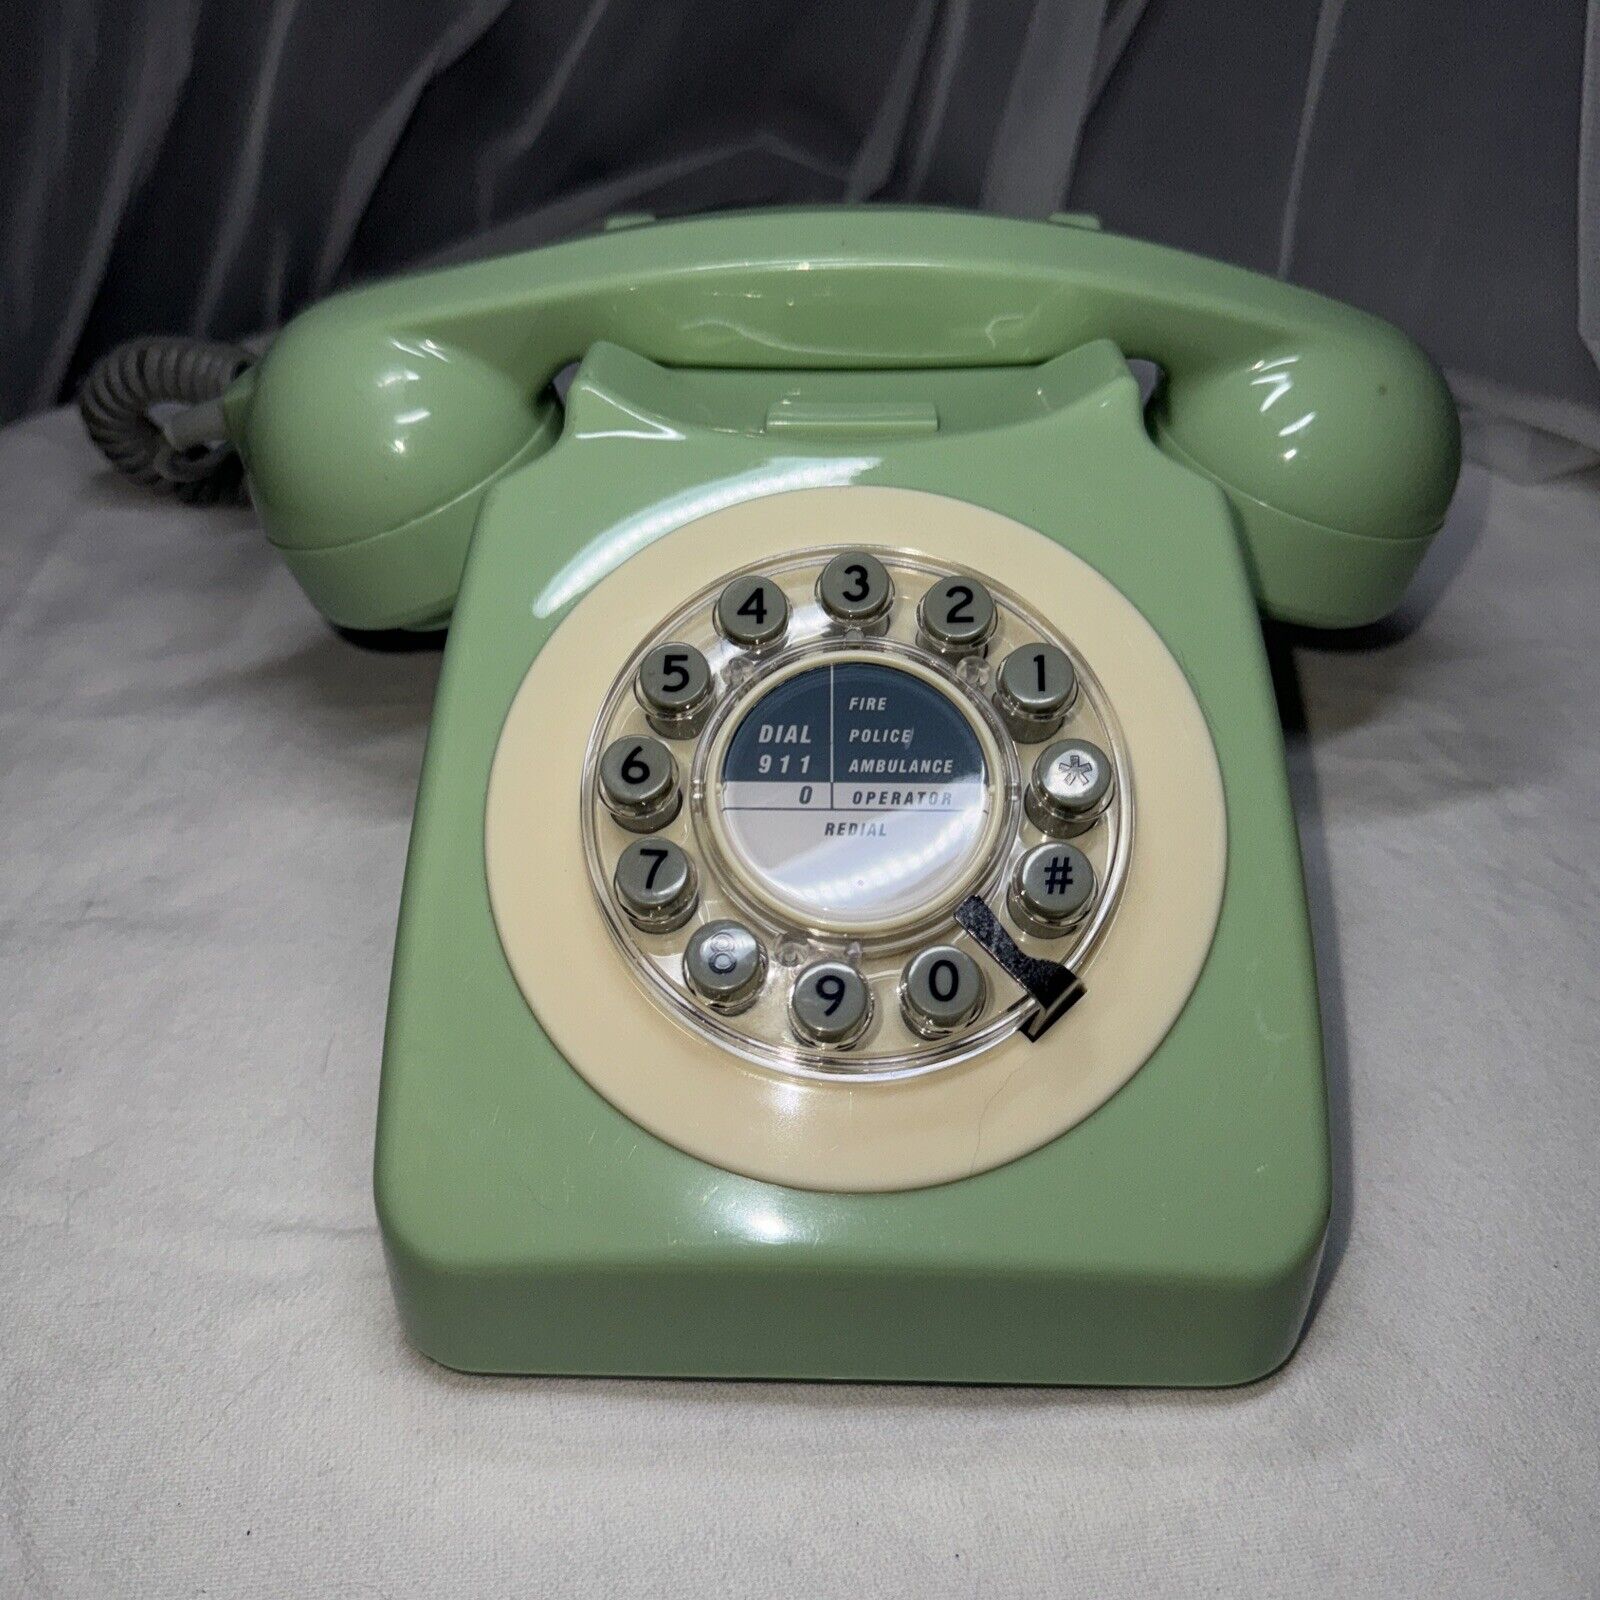 Vintage Mint Green Desk Phone Looks Like Dial/Rotary Really Push Button 746 Mode